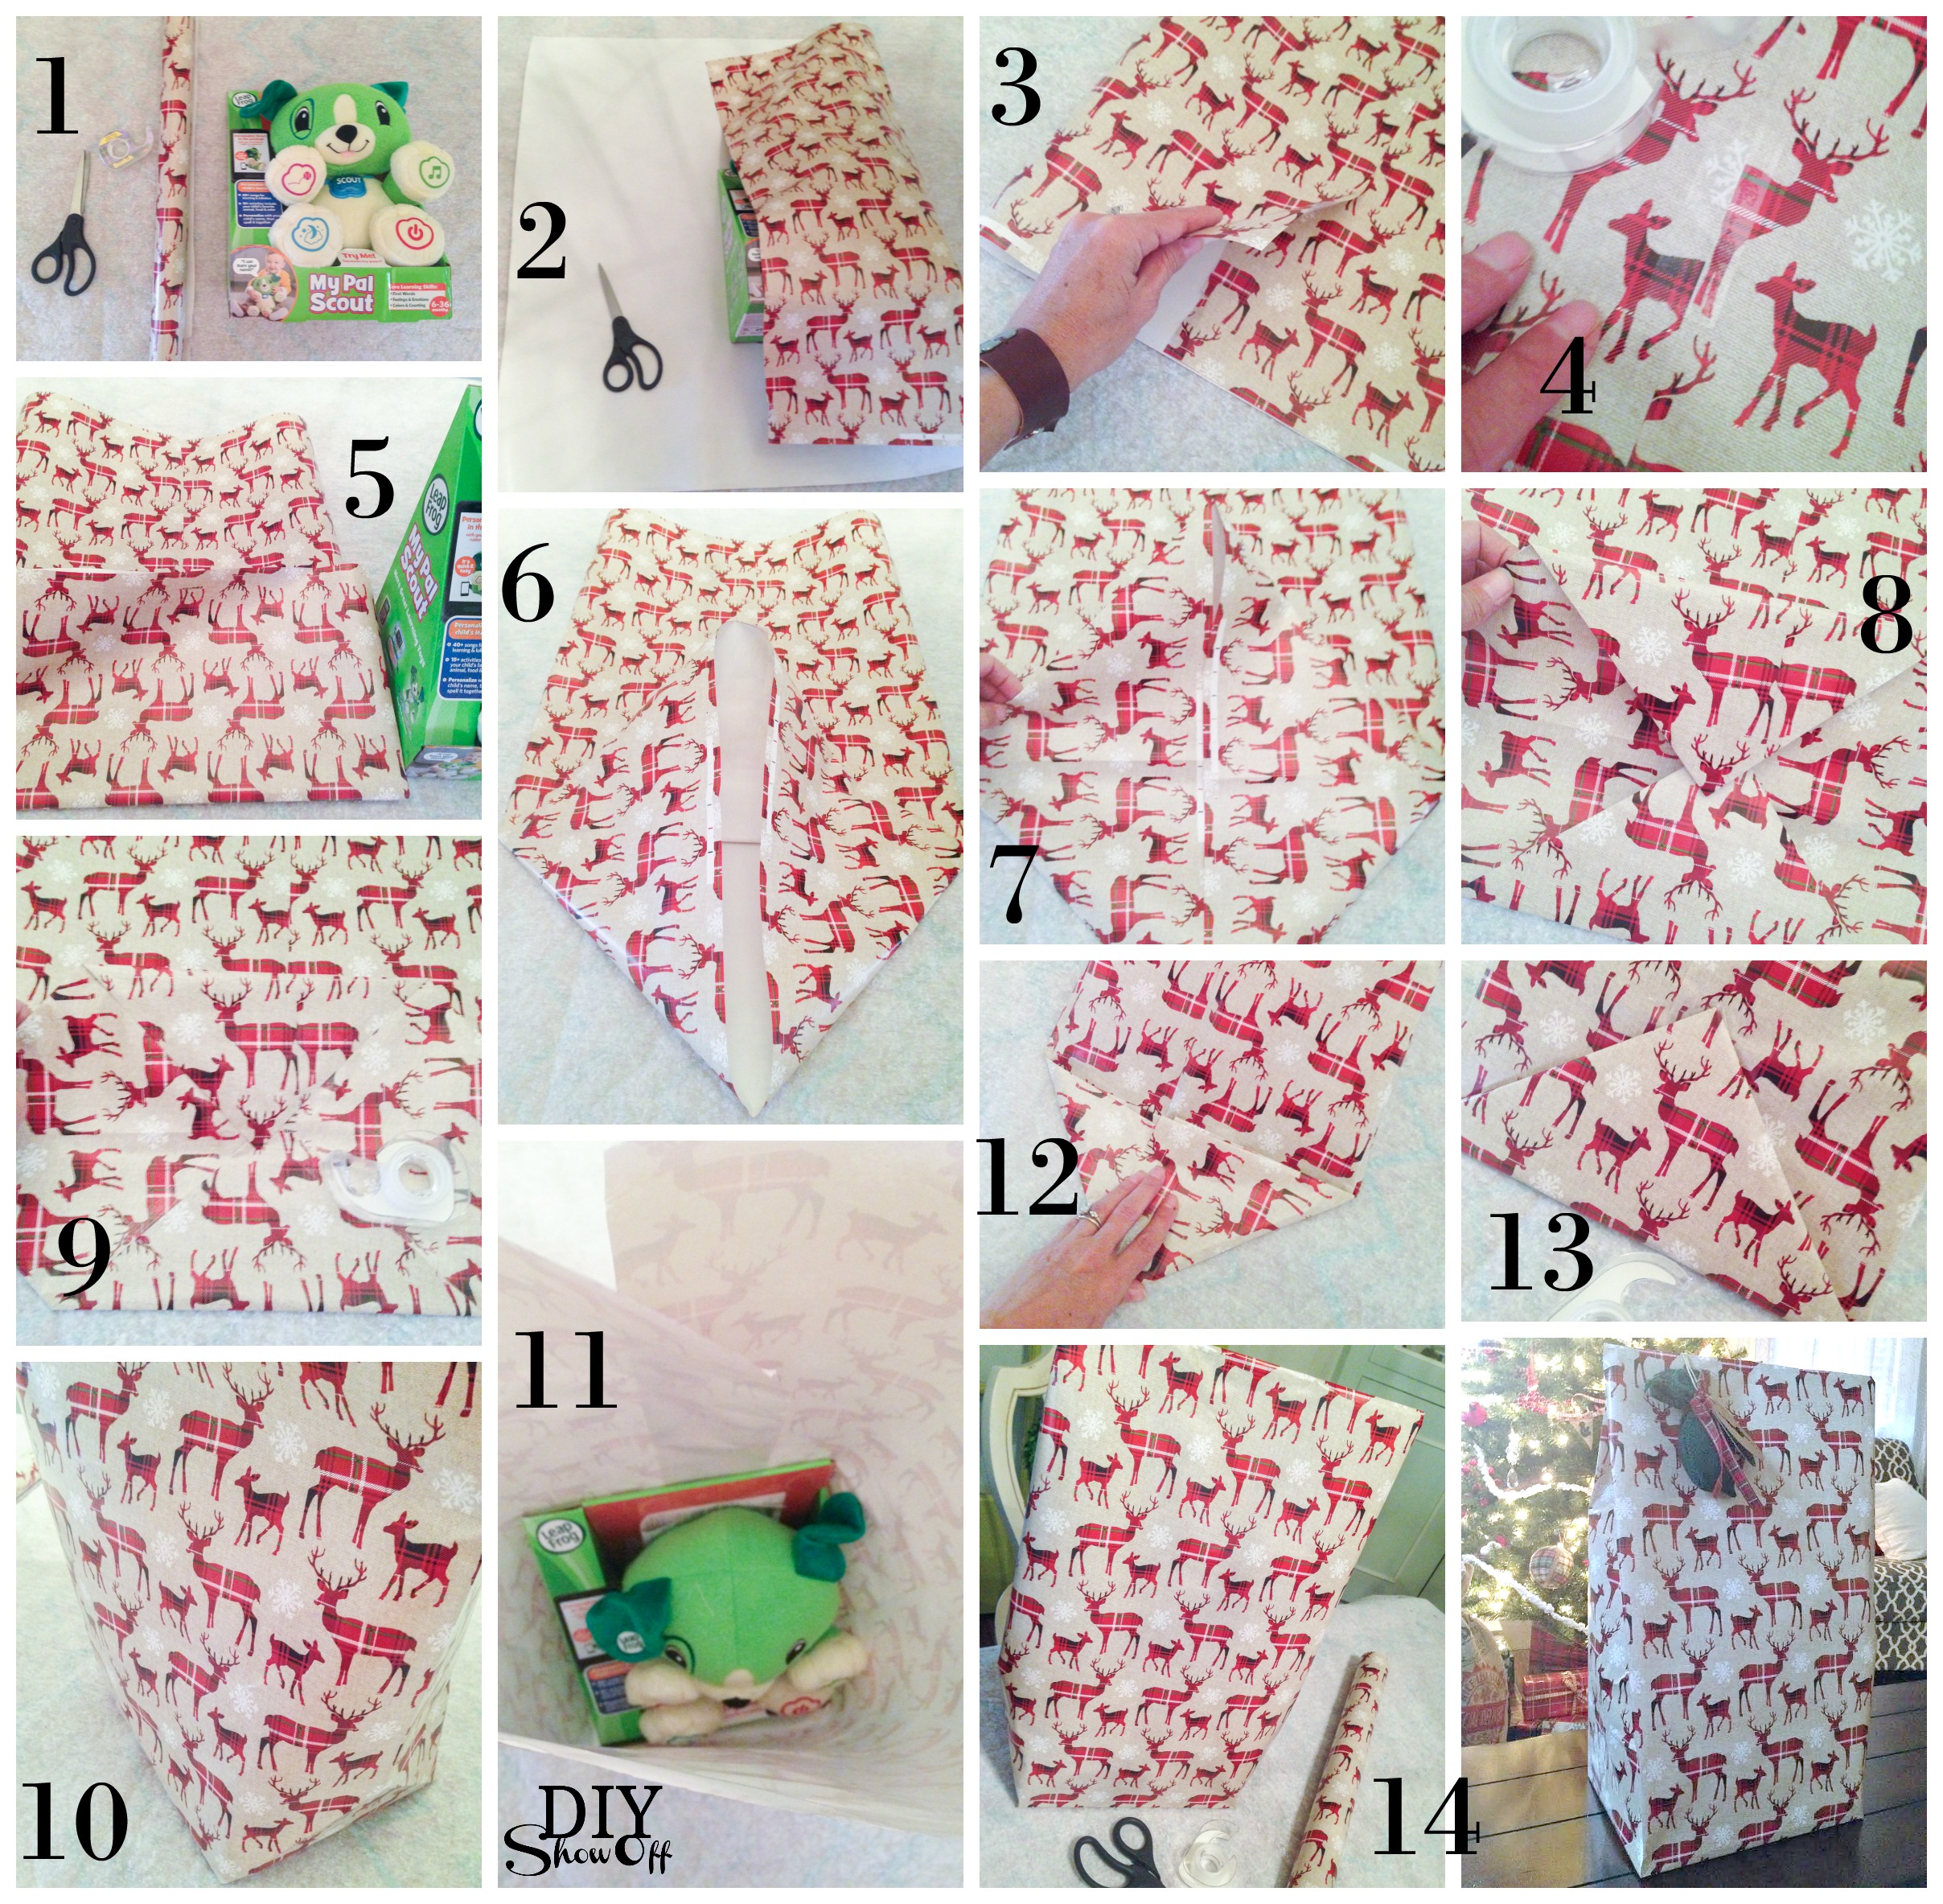 How to Make a Gift Bag from Wrapping Paper in 5 Simple Steps